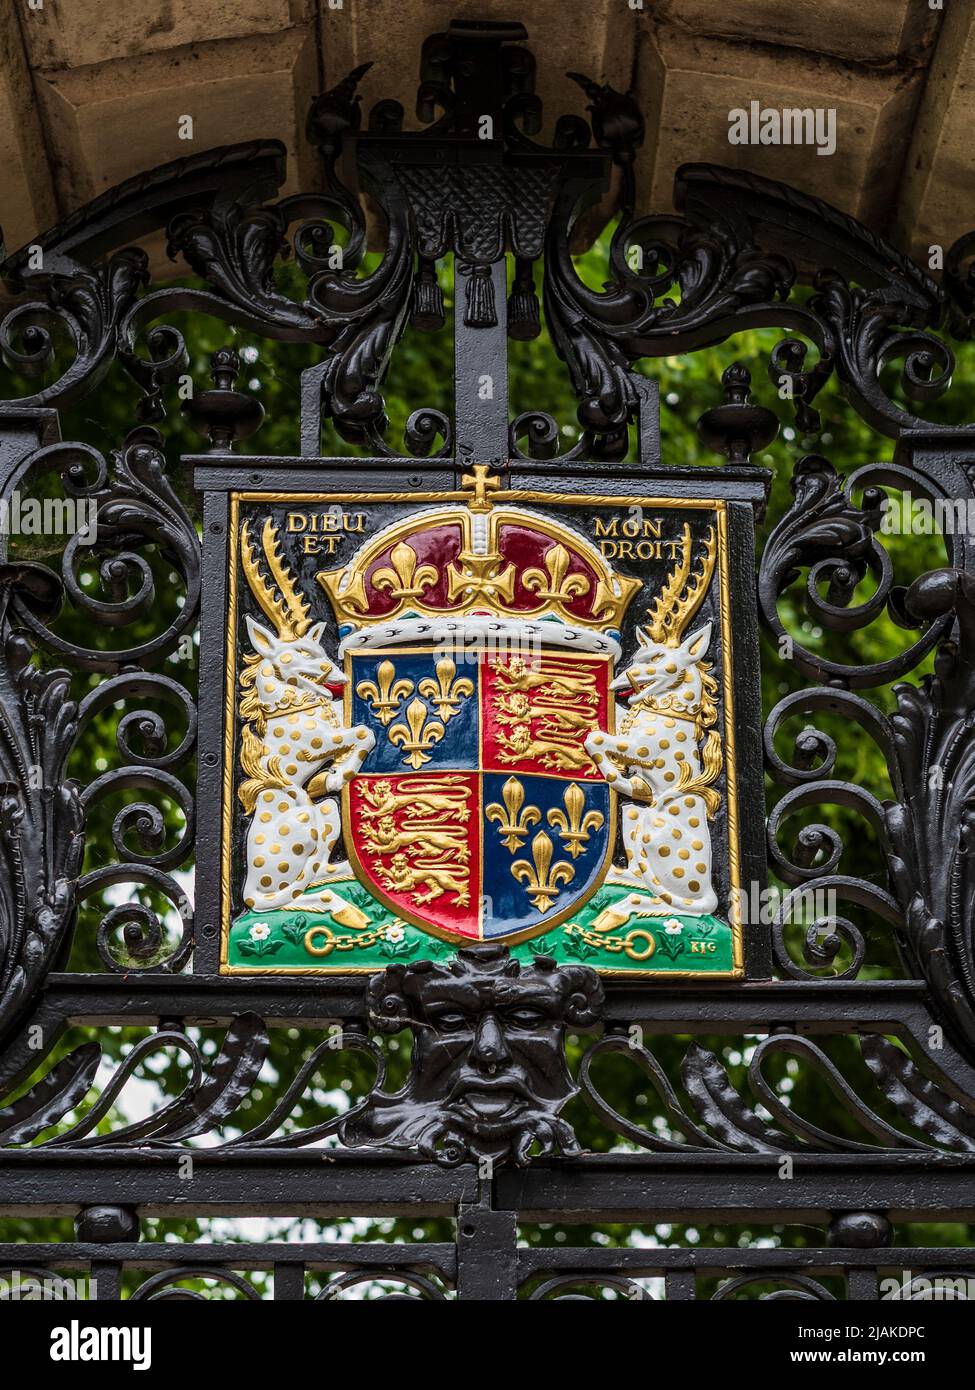 Henry VI Coat of Arms, Kings College Cambridge. Royal Coat of Arms of King Henry VI, fondatore del Kings College nel 1441 Foto Stock